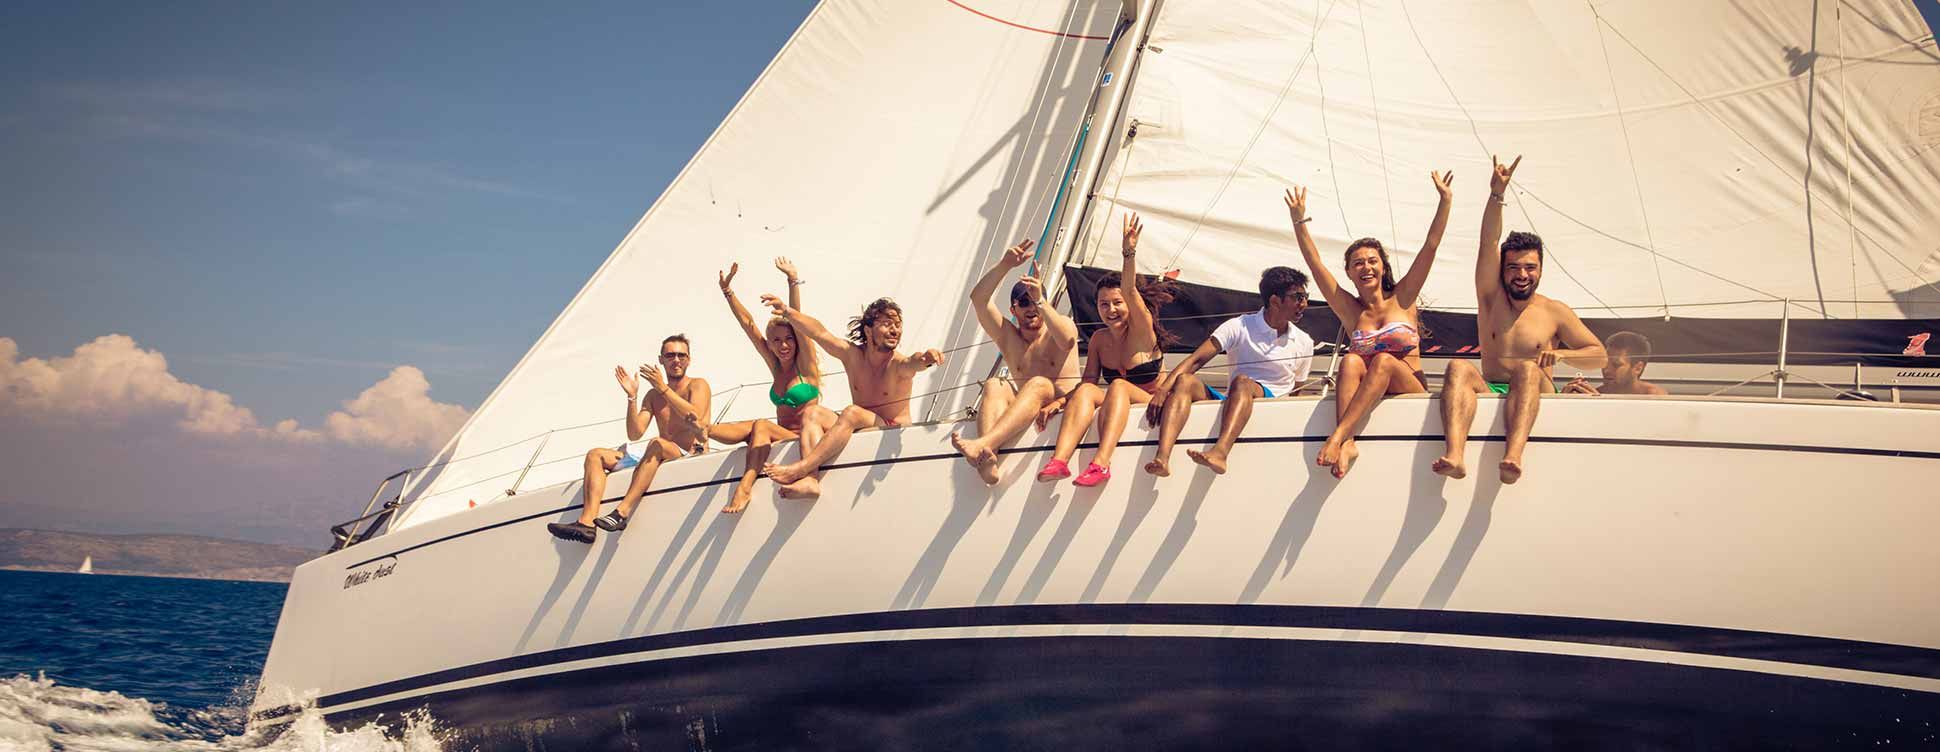 7 Reasons Yacht Charters Are Perfect for Summer Family Getaways